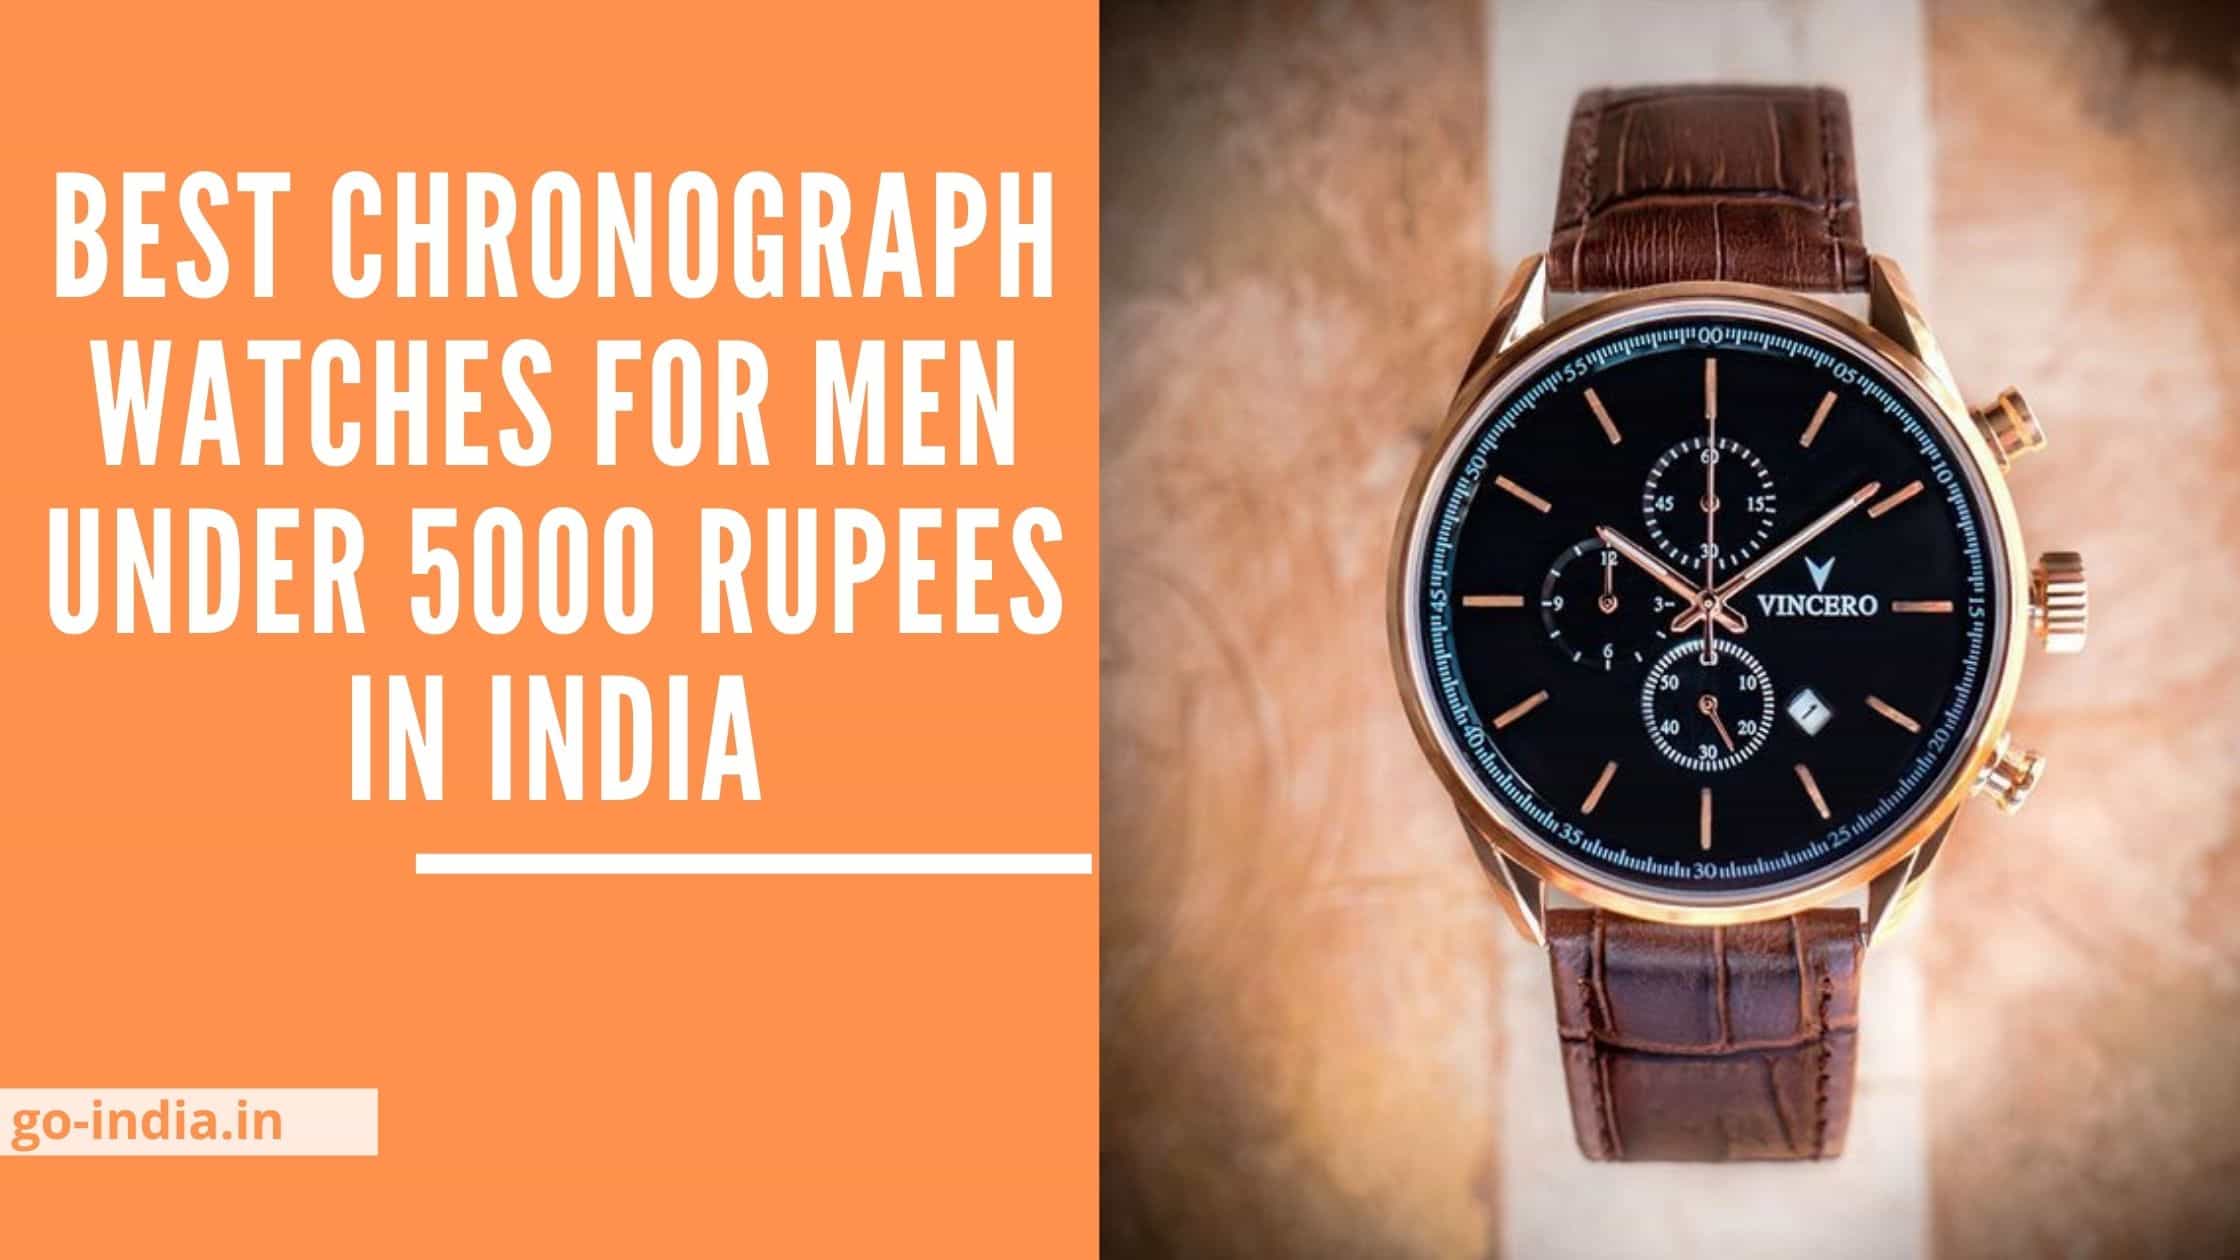 Top 10 Best Chronograph Watches For Men Under 5000 Rupees in India 2022